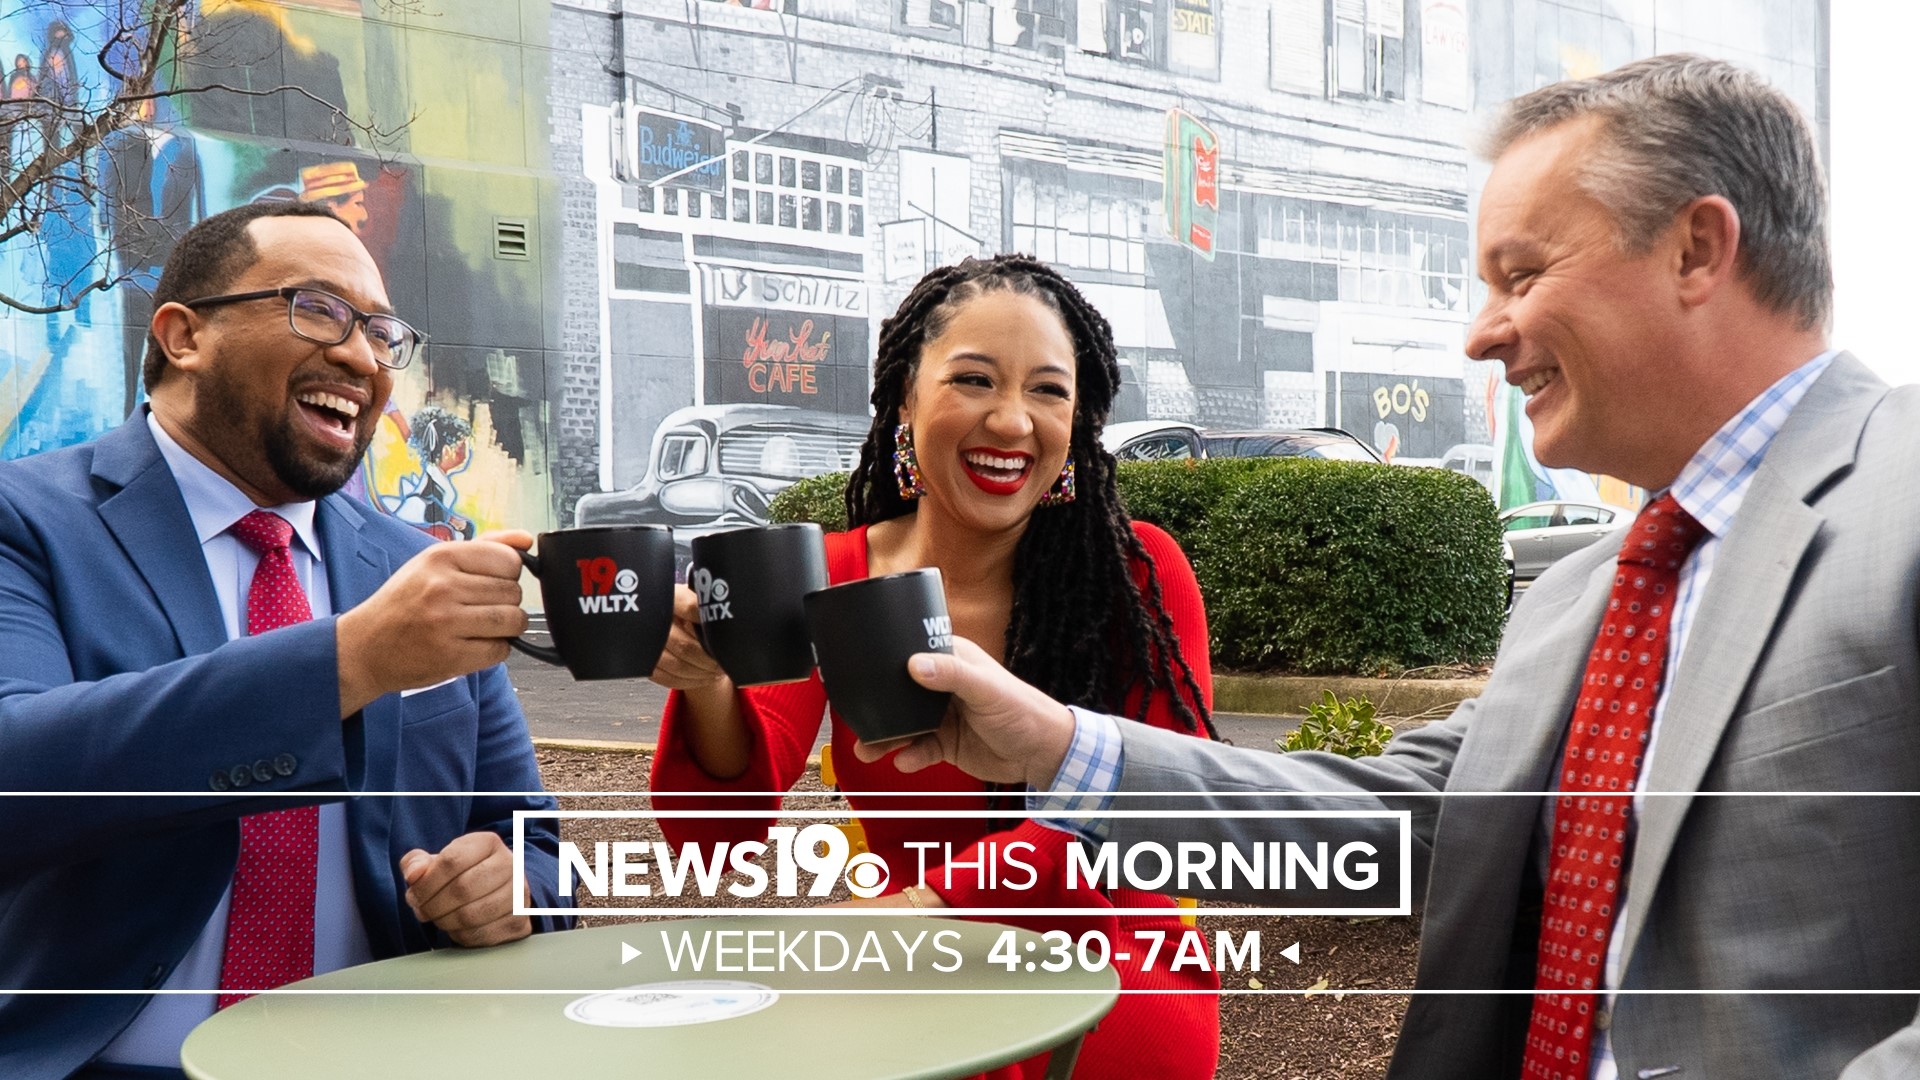 The News19 Morning team provides a look at updated overnight news and developing stories, along with up-to-the-minute weather forecasts and live traffic conditions.